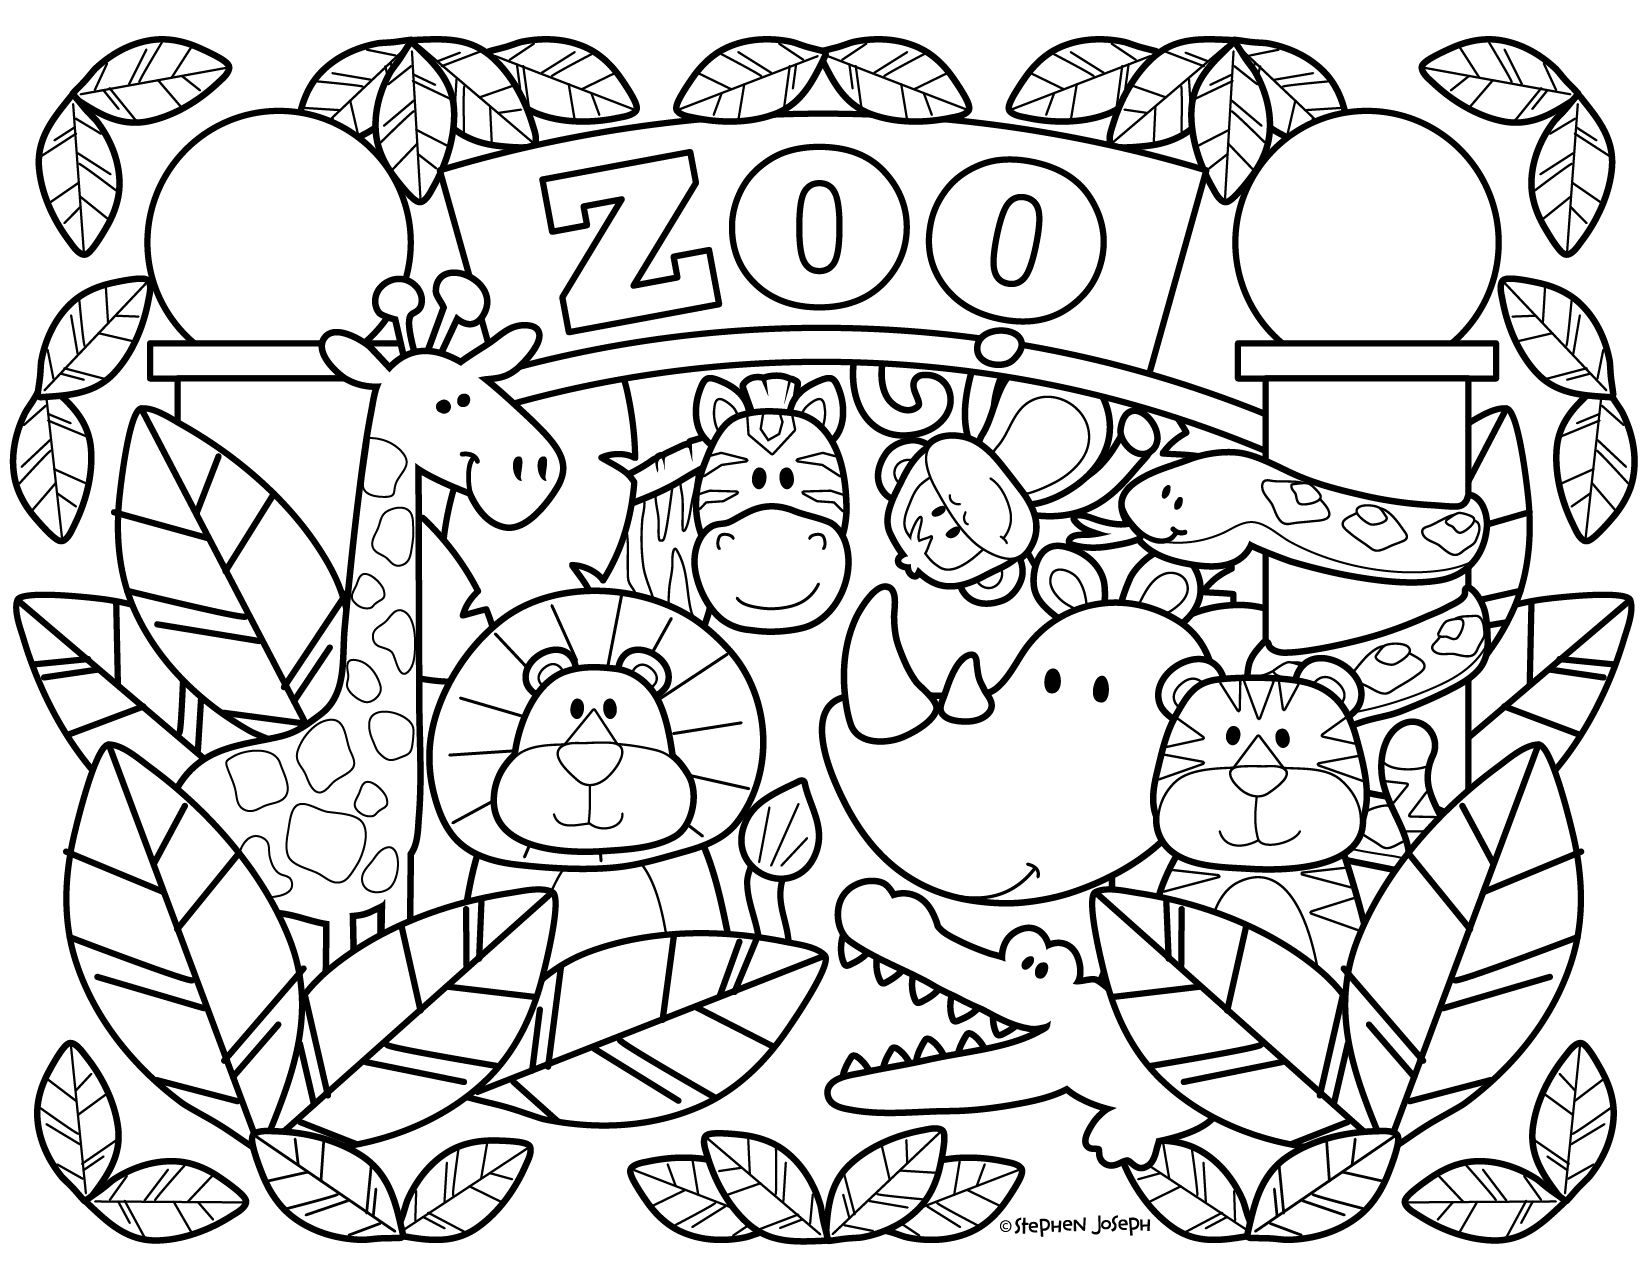 Zoo Coloring Pages Printable & Free! By Stephen Joseph Gifts Zoo